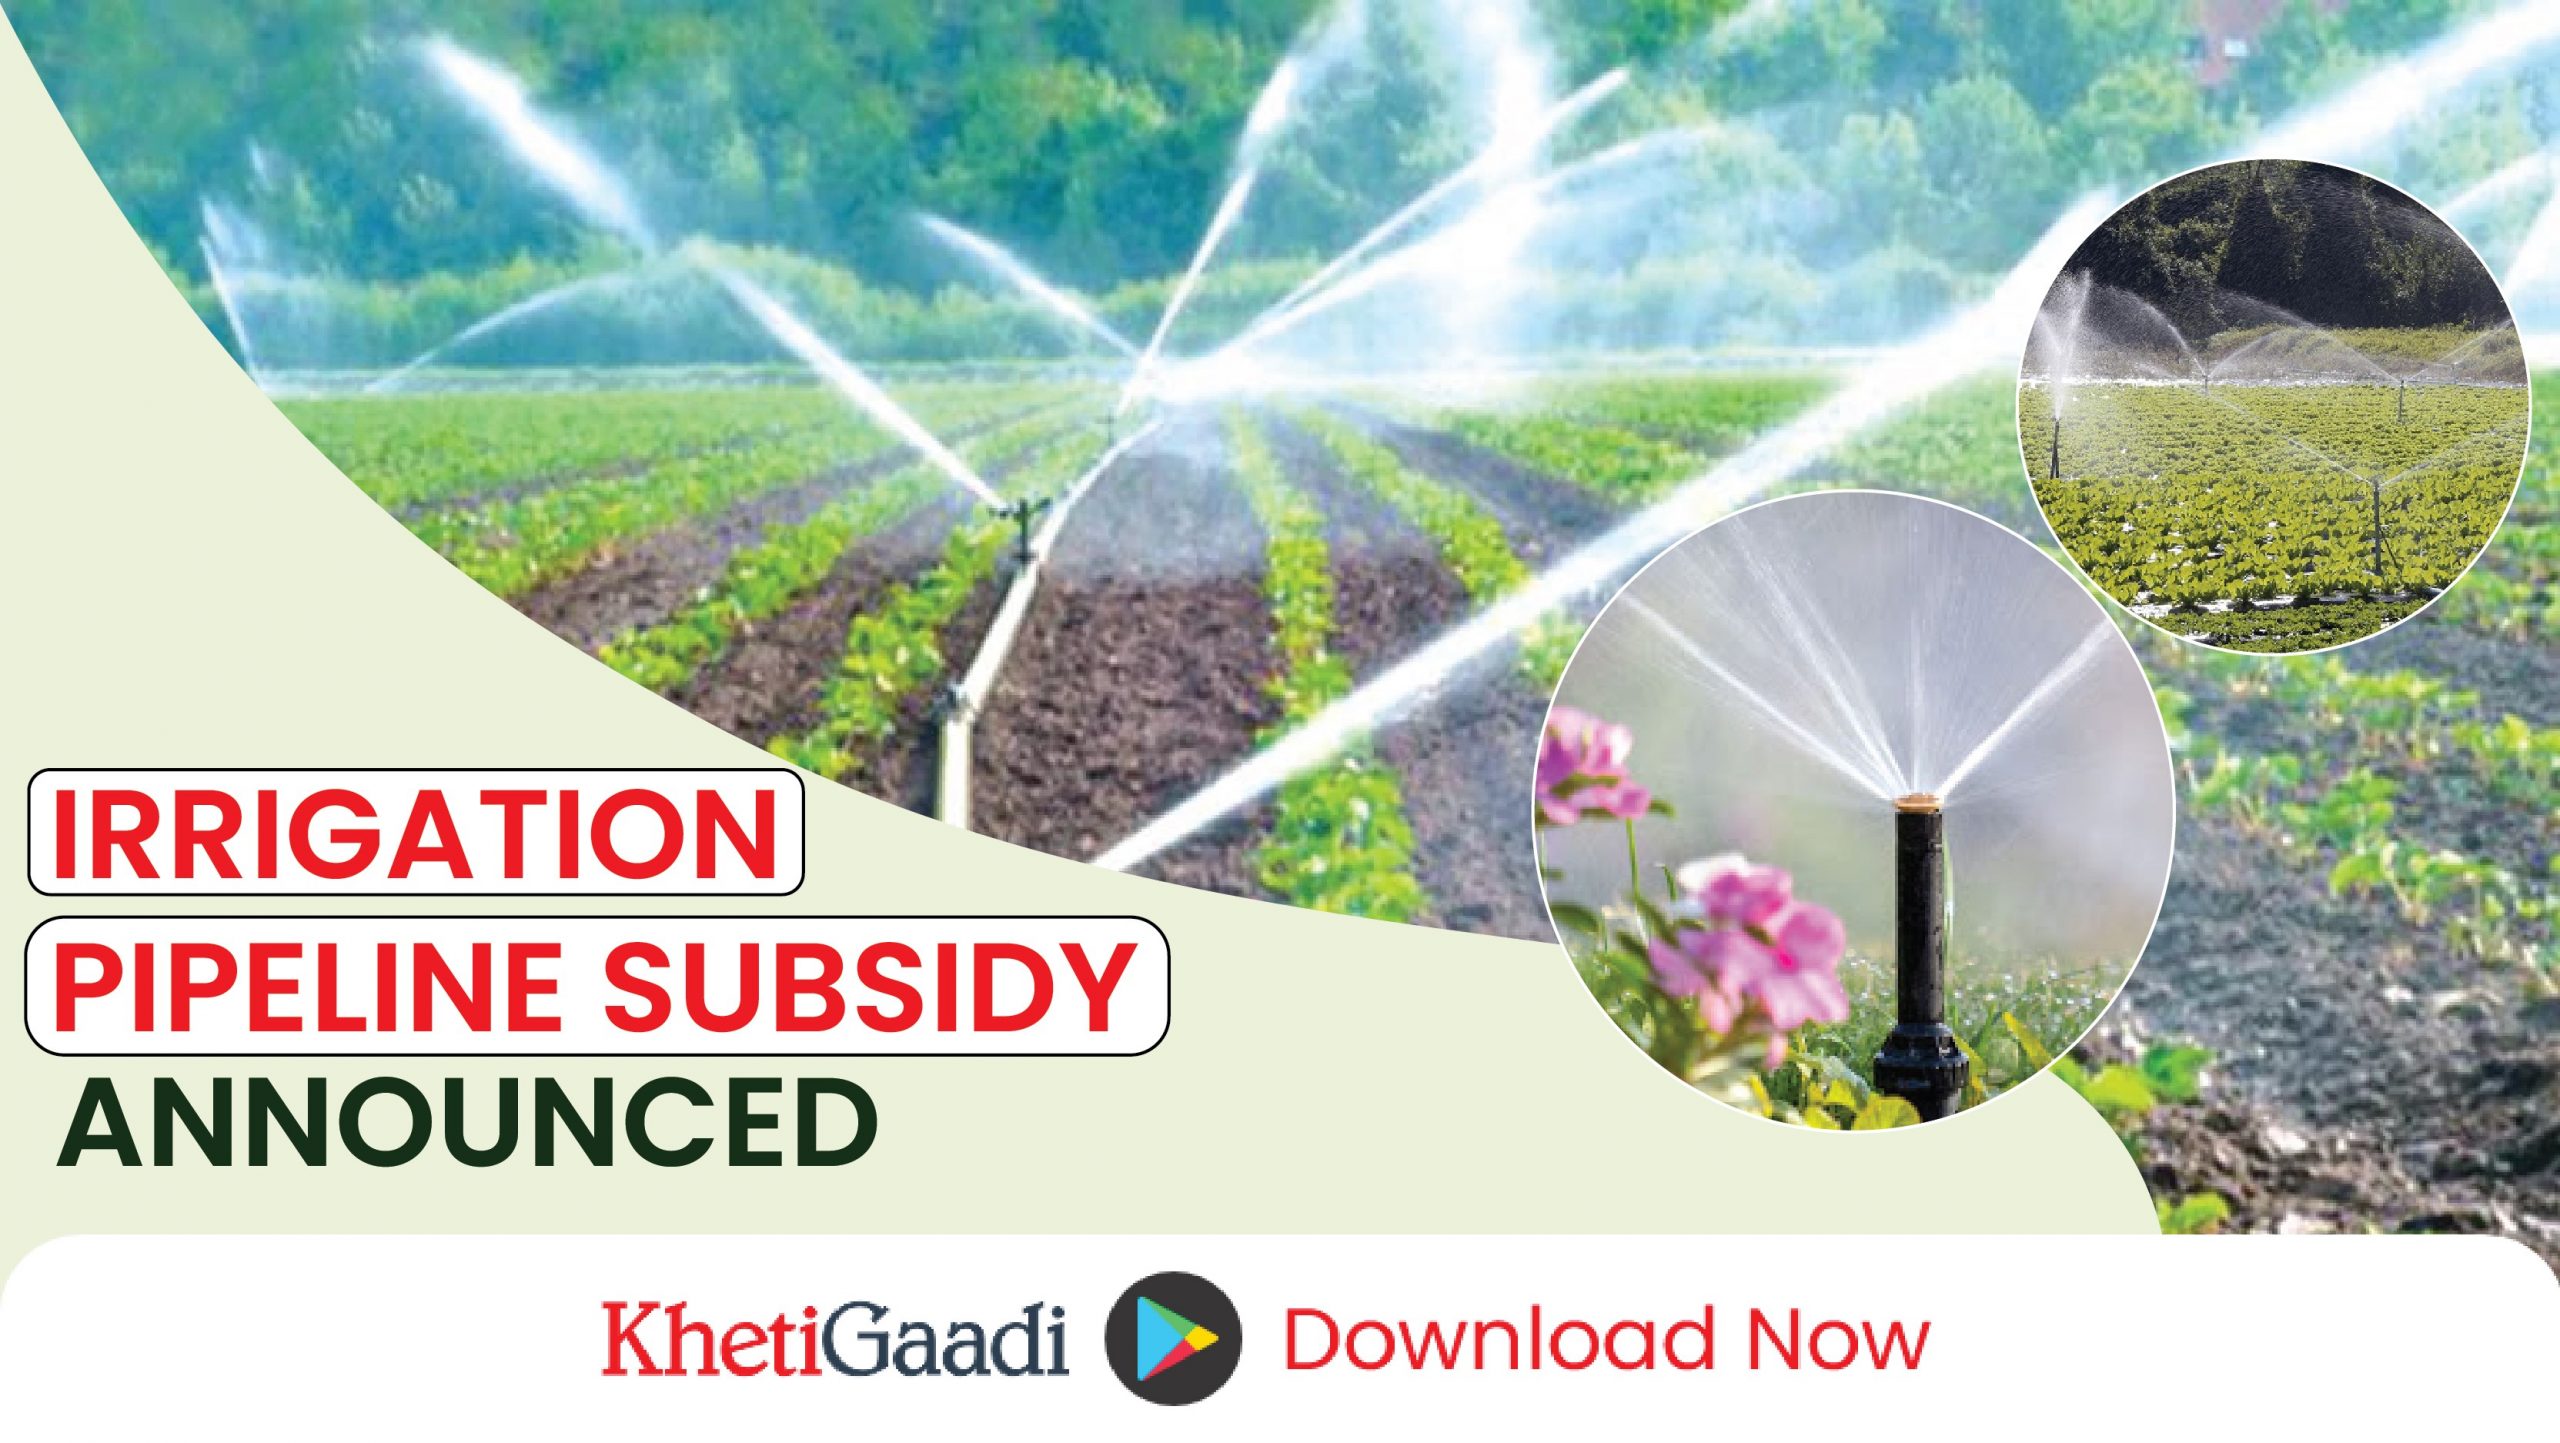 Last call for farmers: ‘Irrigation Pipeline Subsidy’ ends tomorrow!